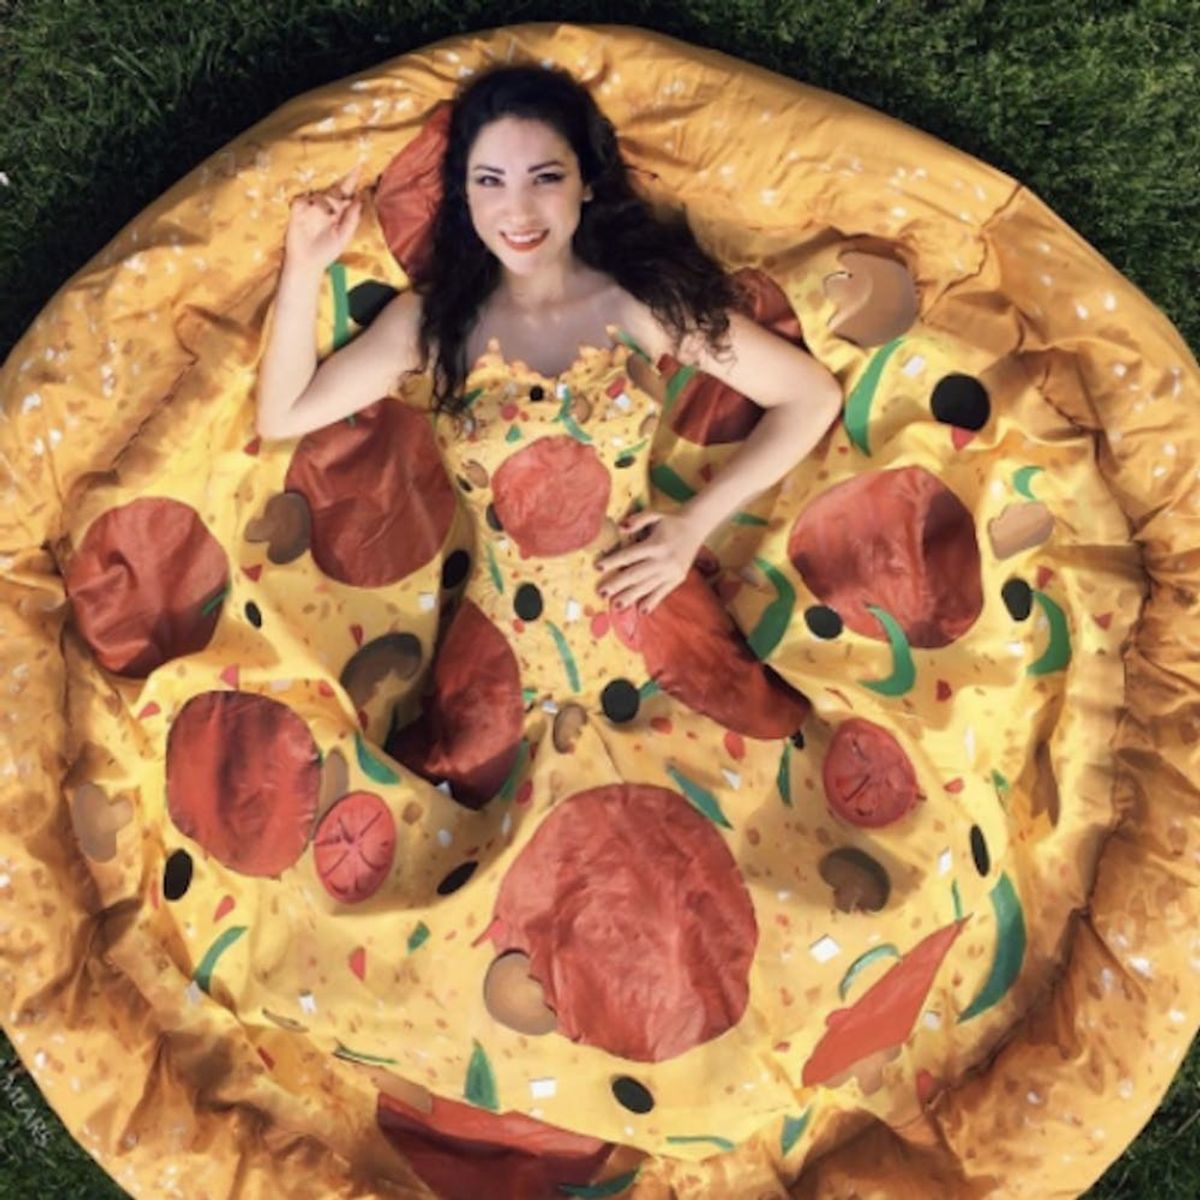 This Woman Created the Fantasy Pizza Prom Dress of Your Dreams